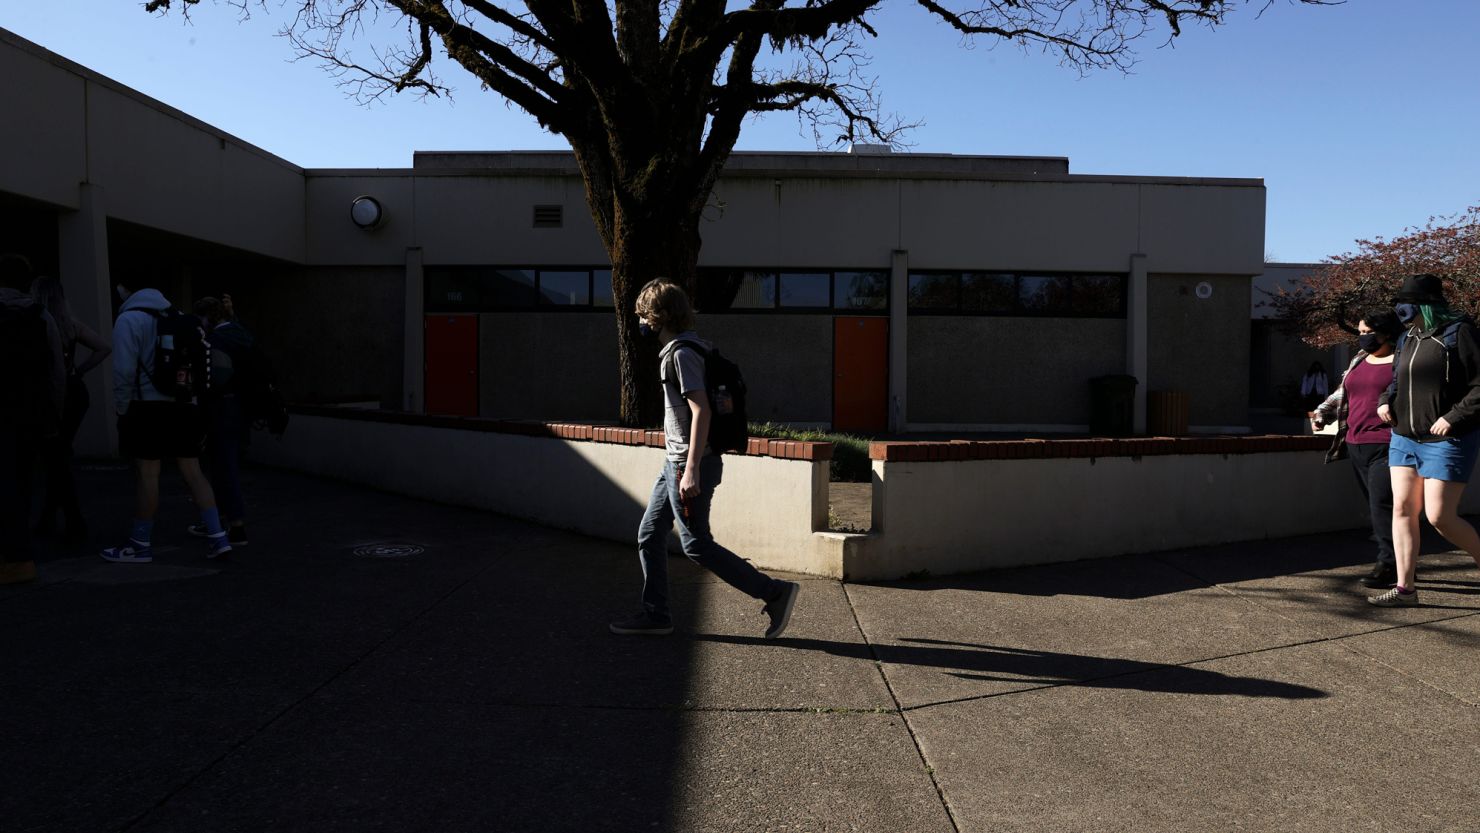 Students arrive back for in-person learning at Sprague High School in Salem, Oregon on April 15, 2021